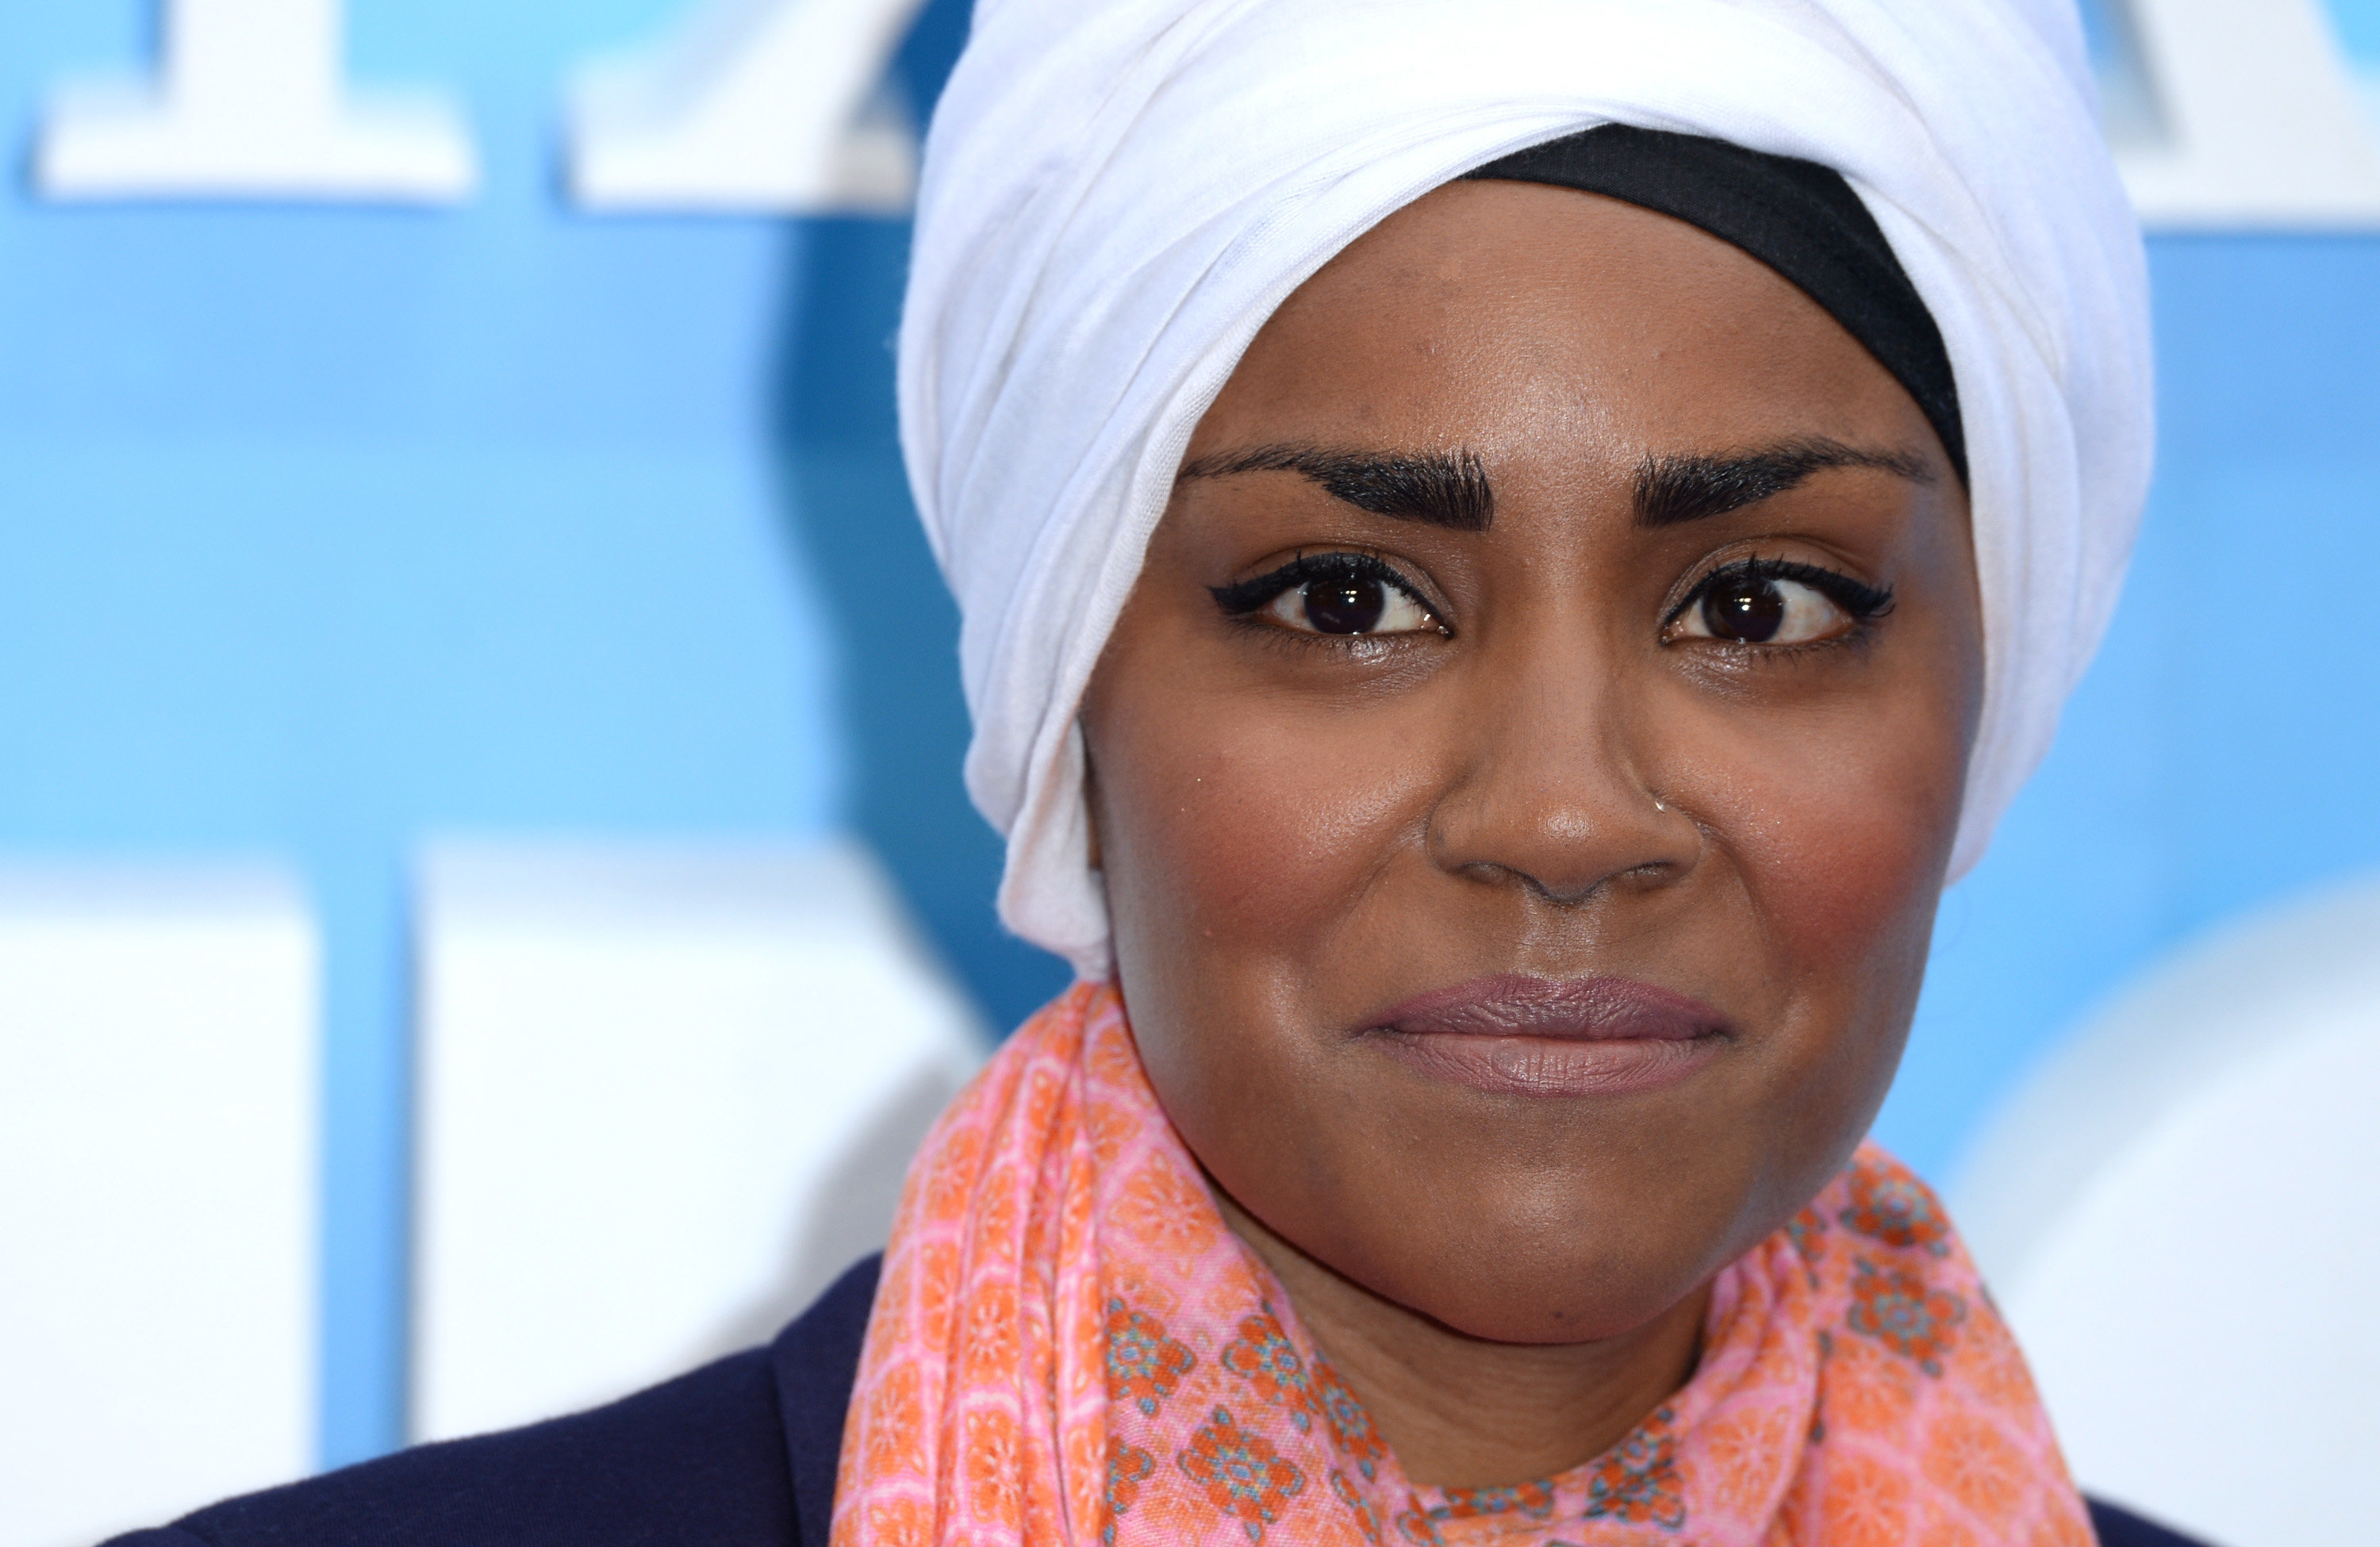 <strong>Nadiya found fame after winning 'Bake Off' in 2015&nbsp;</strong>